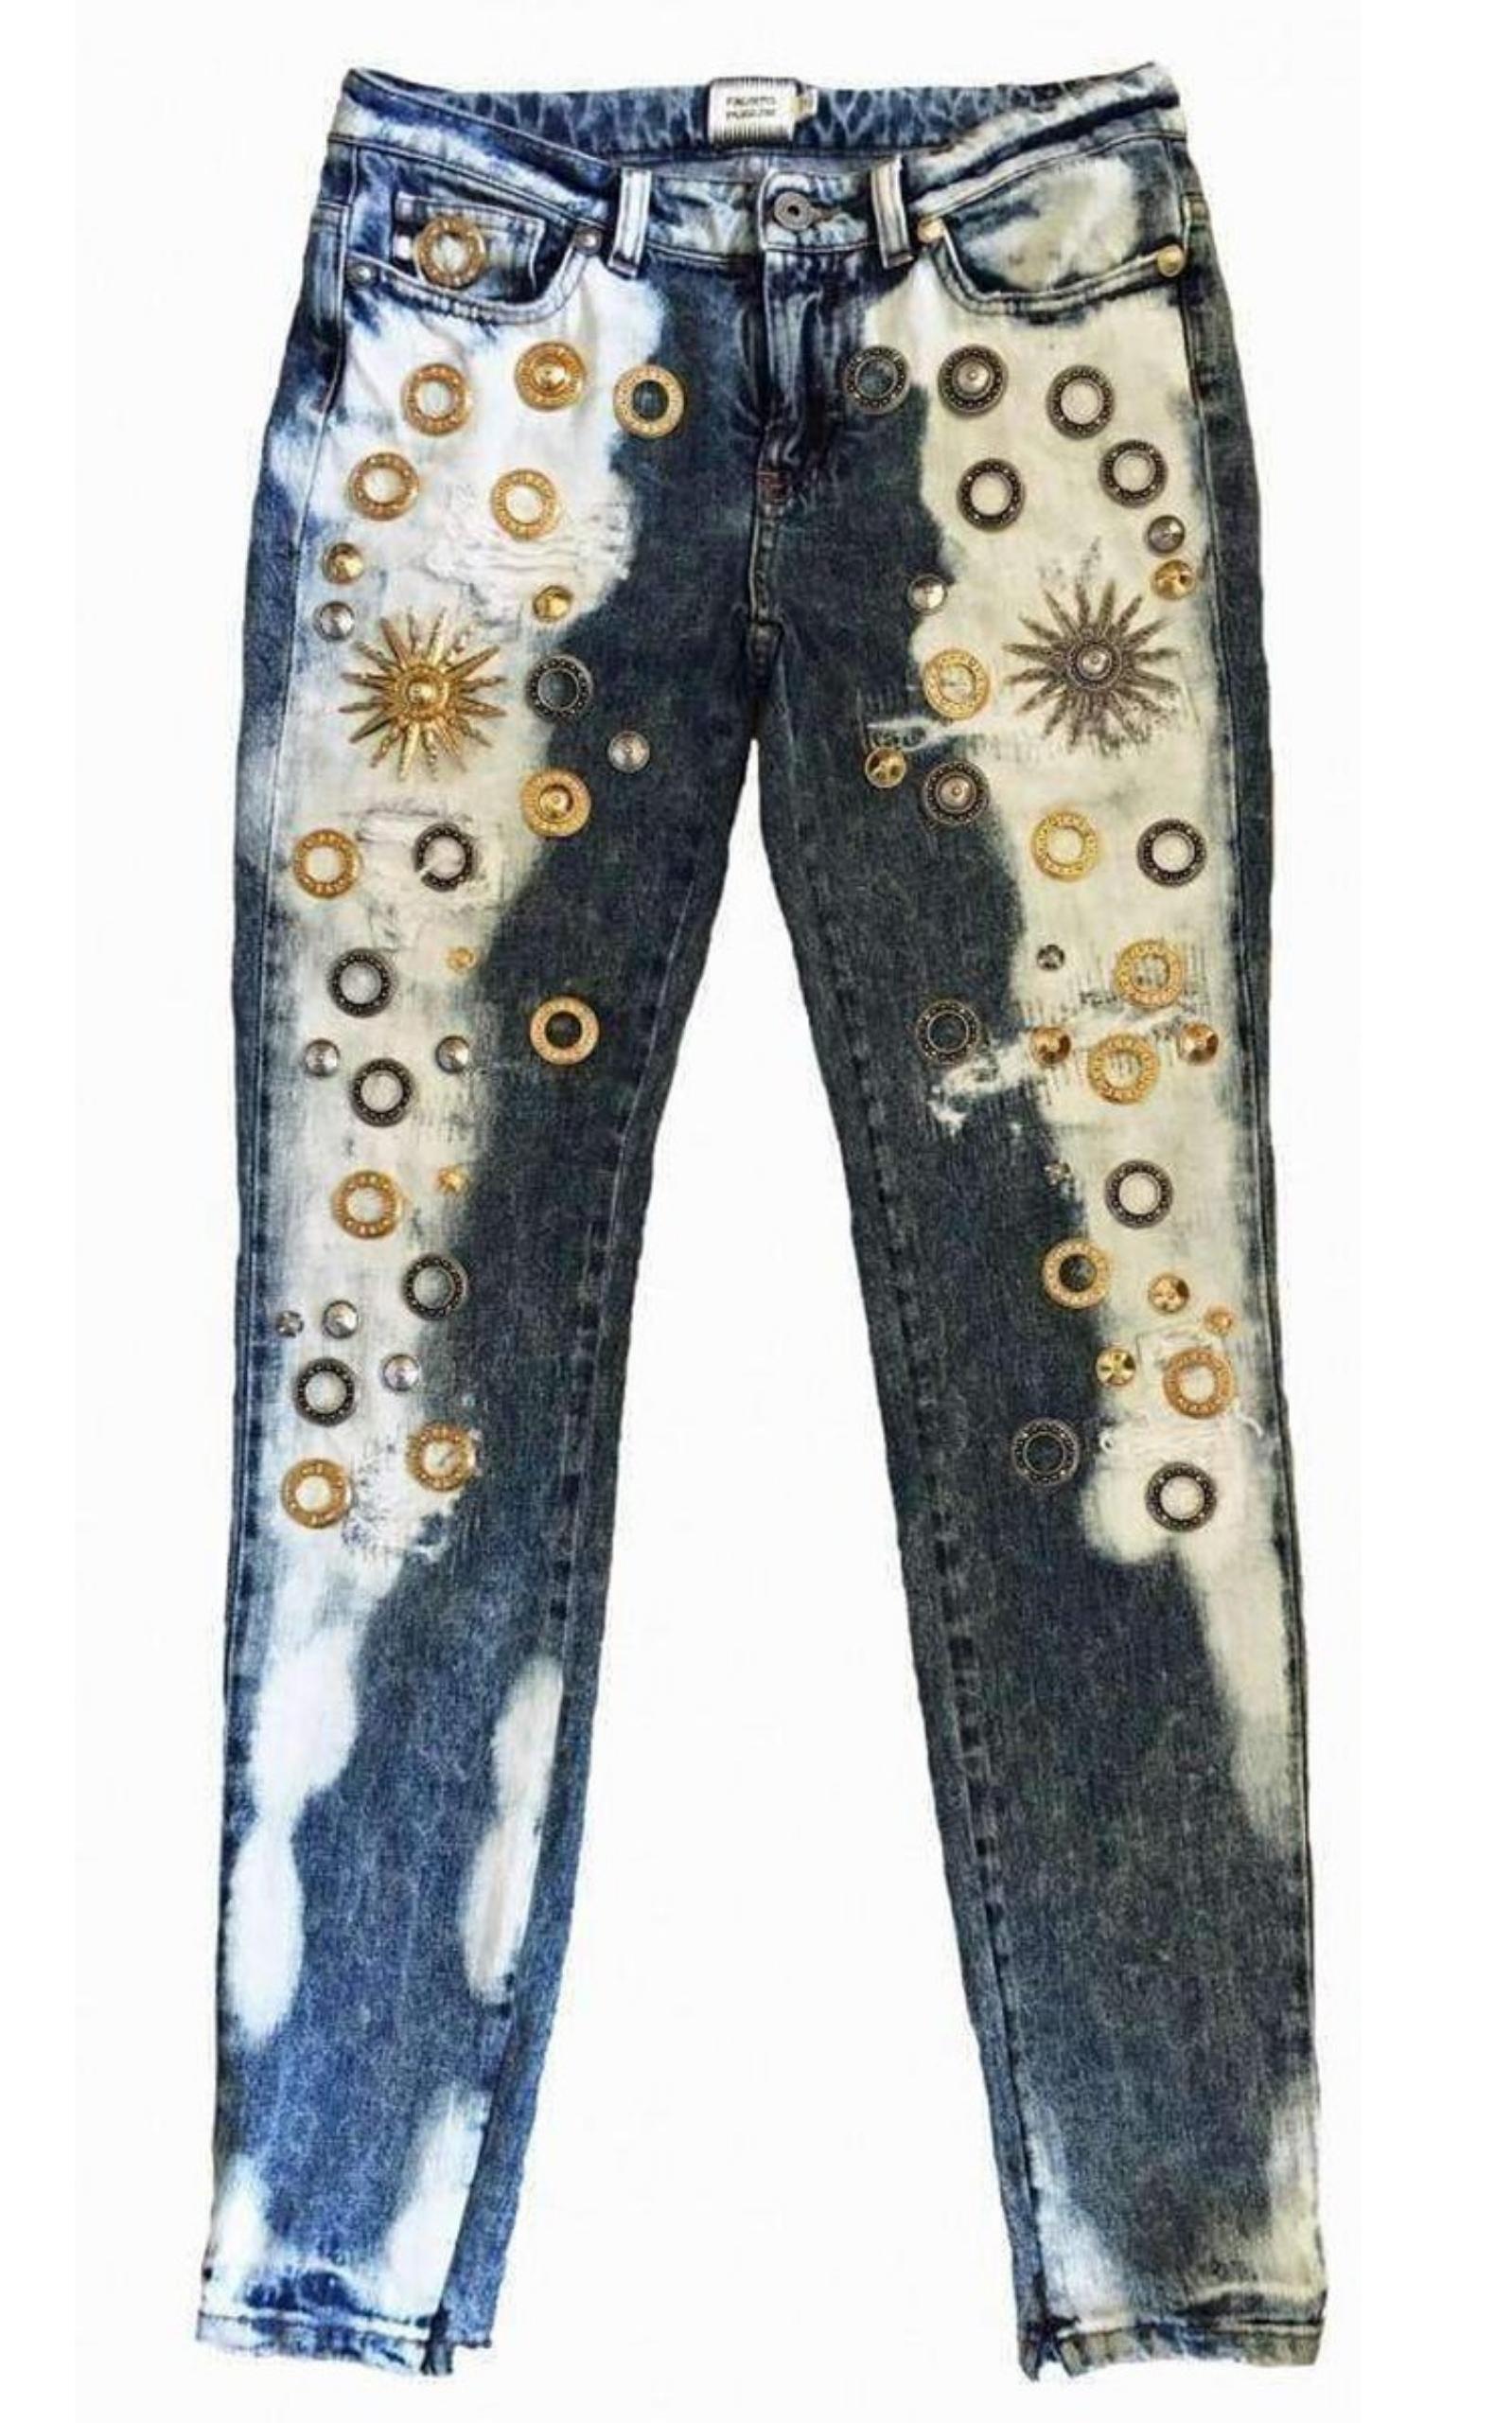 Re-Worked Jeans: Patchwork, Embellished, Embroidered, + Painted